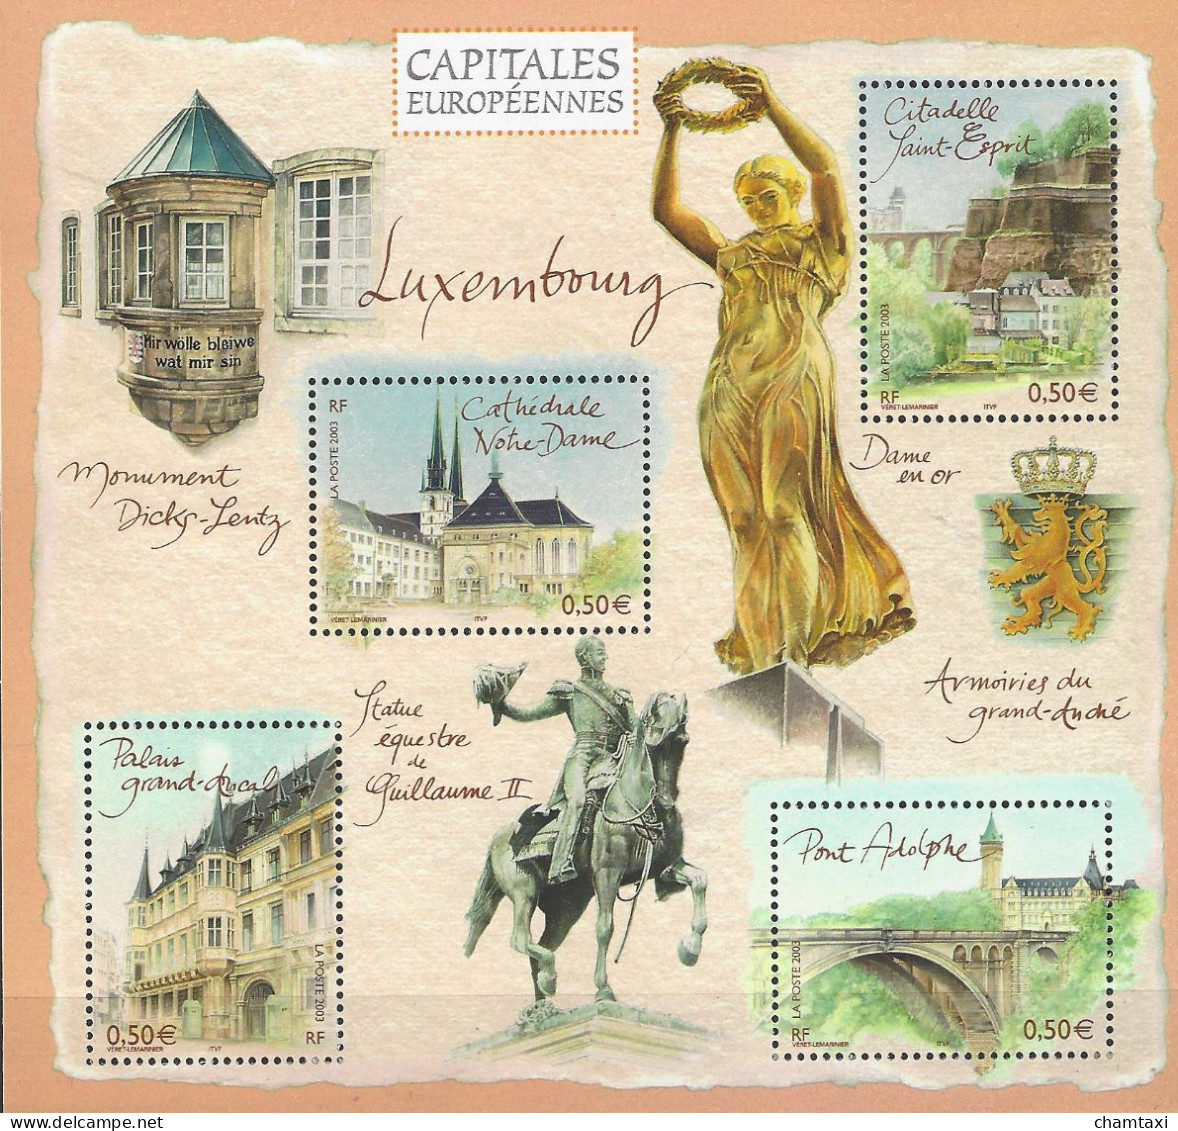 FRANCE 2003 BLOC 64 SERIE CAPITALES EUROPEENNES LUXEMBOURG CATHEDRALE NOTRE DAME CITADELLE SAINT ESPRIT PONT ADOLPHE - Mint/Hinged